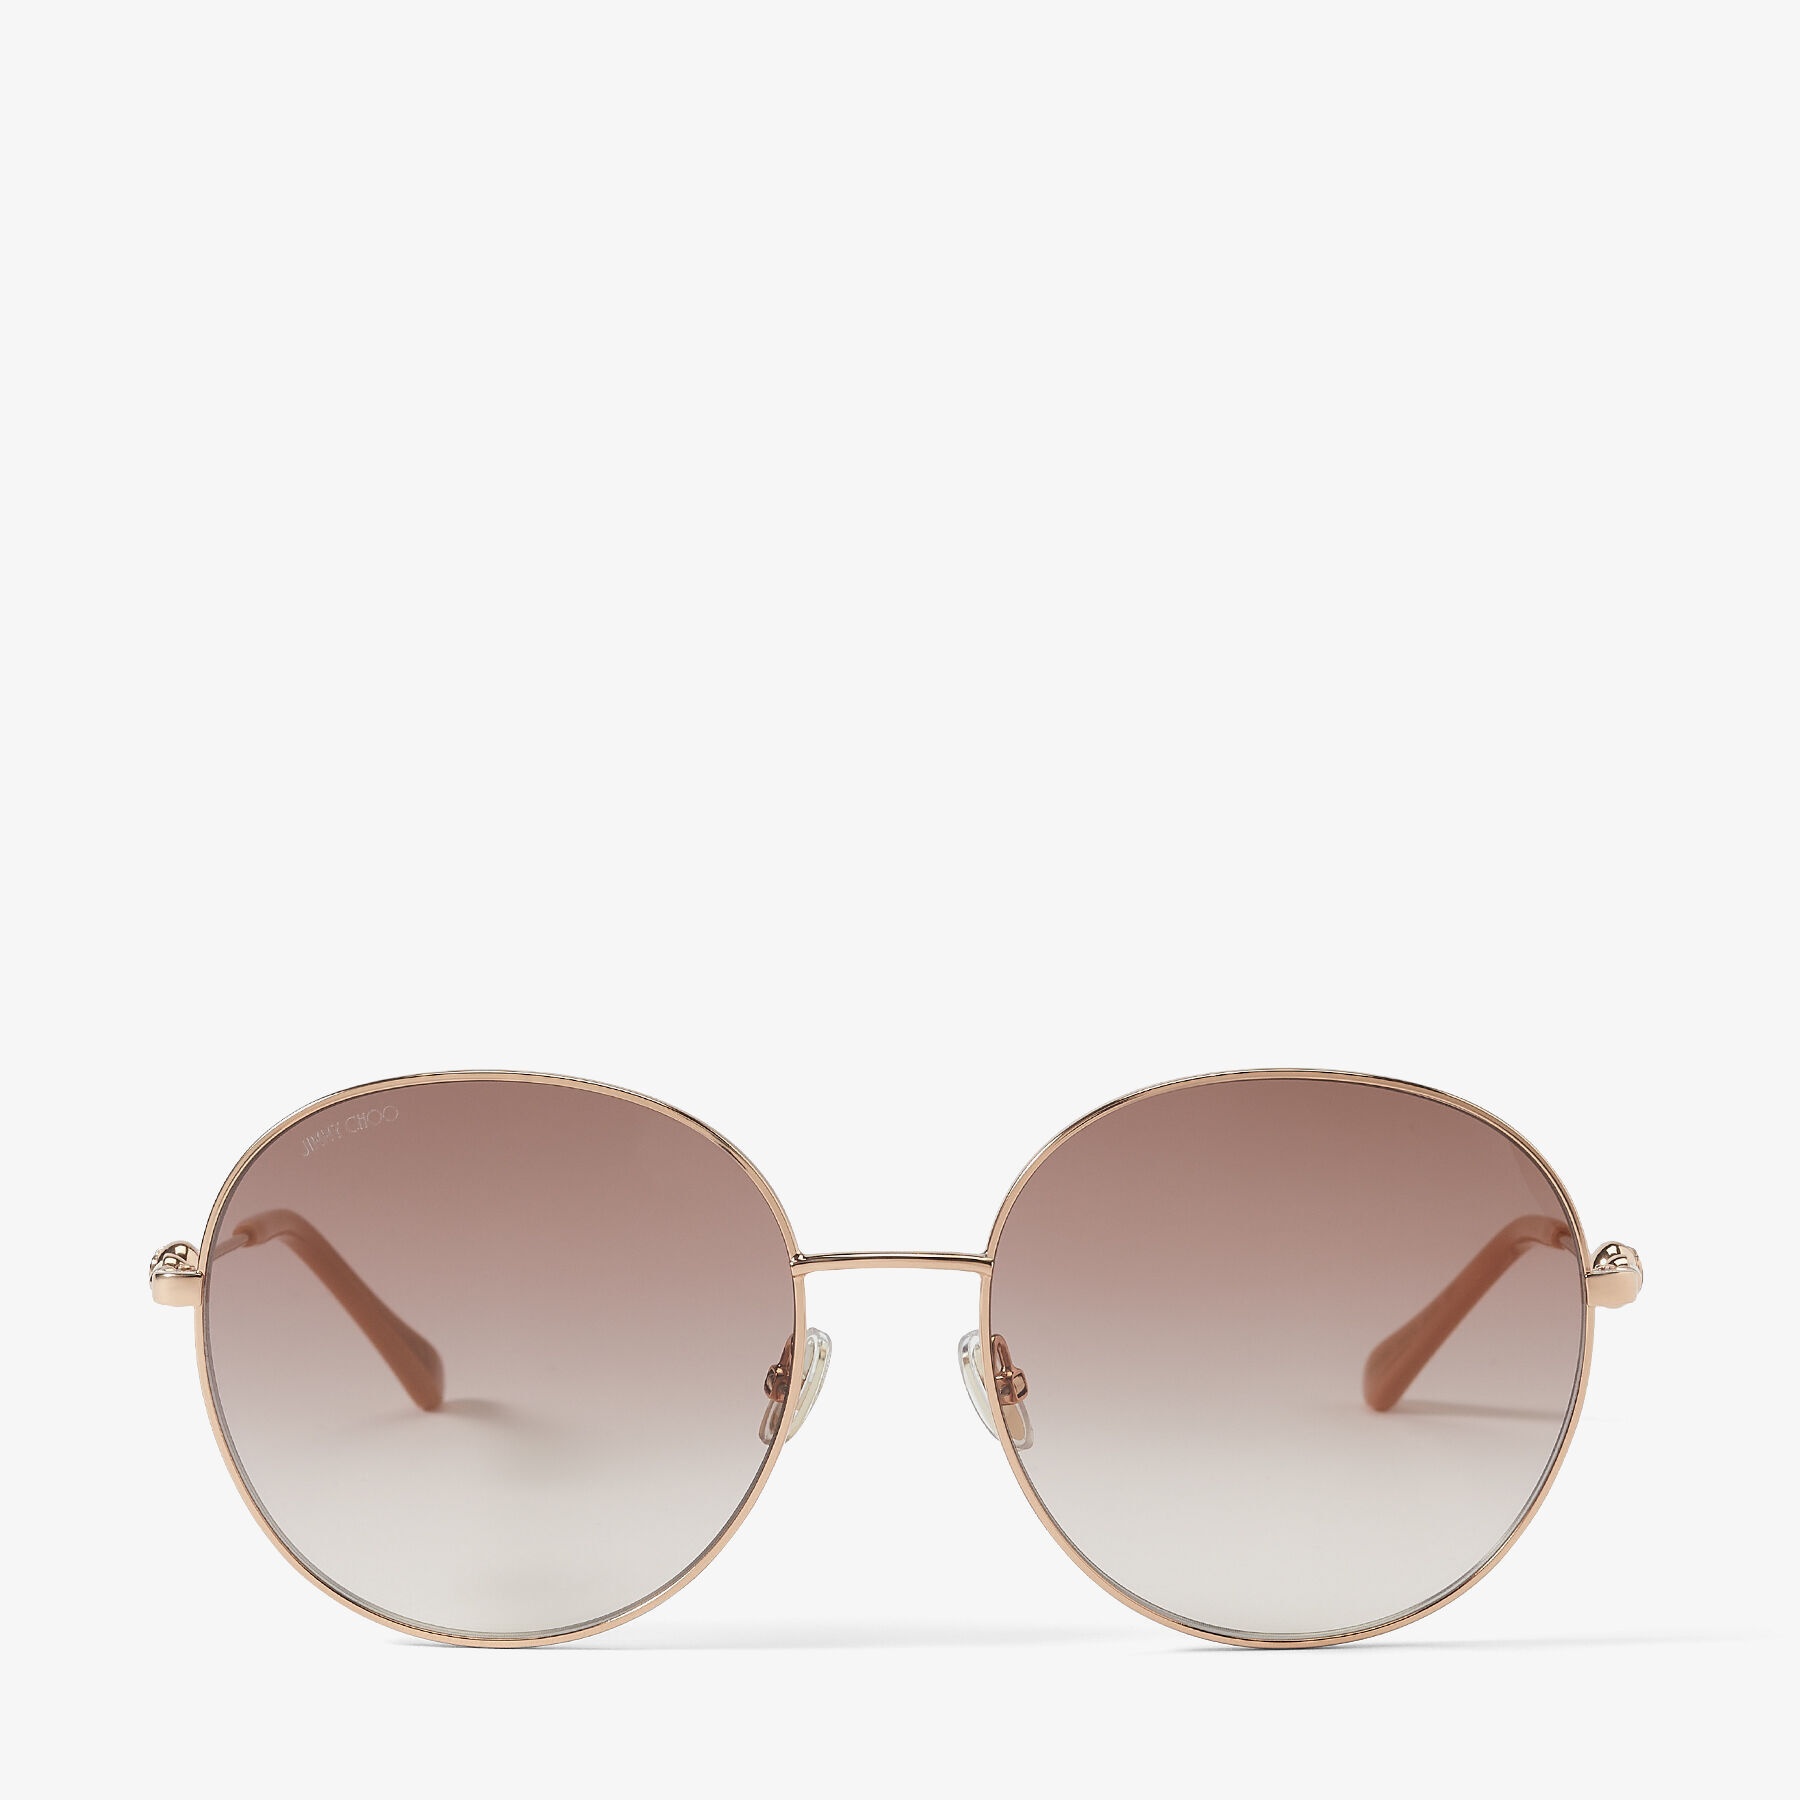 Birdie
Copper Gold Round-Frame Sunglasses with Pearls - 1